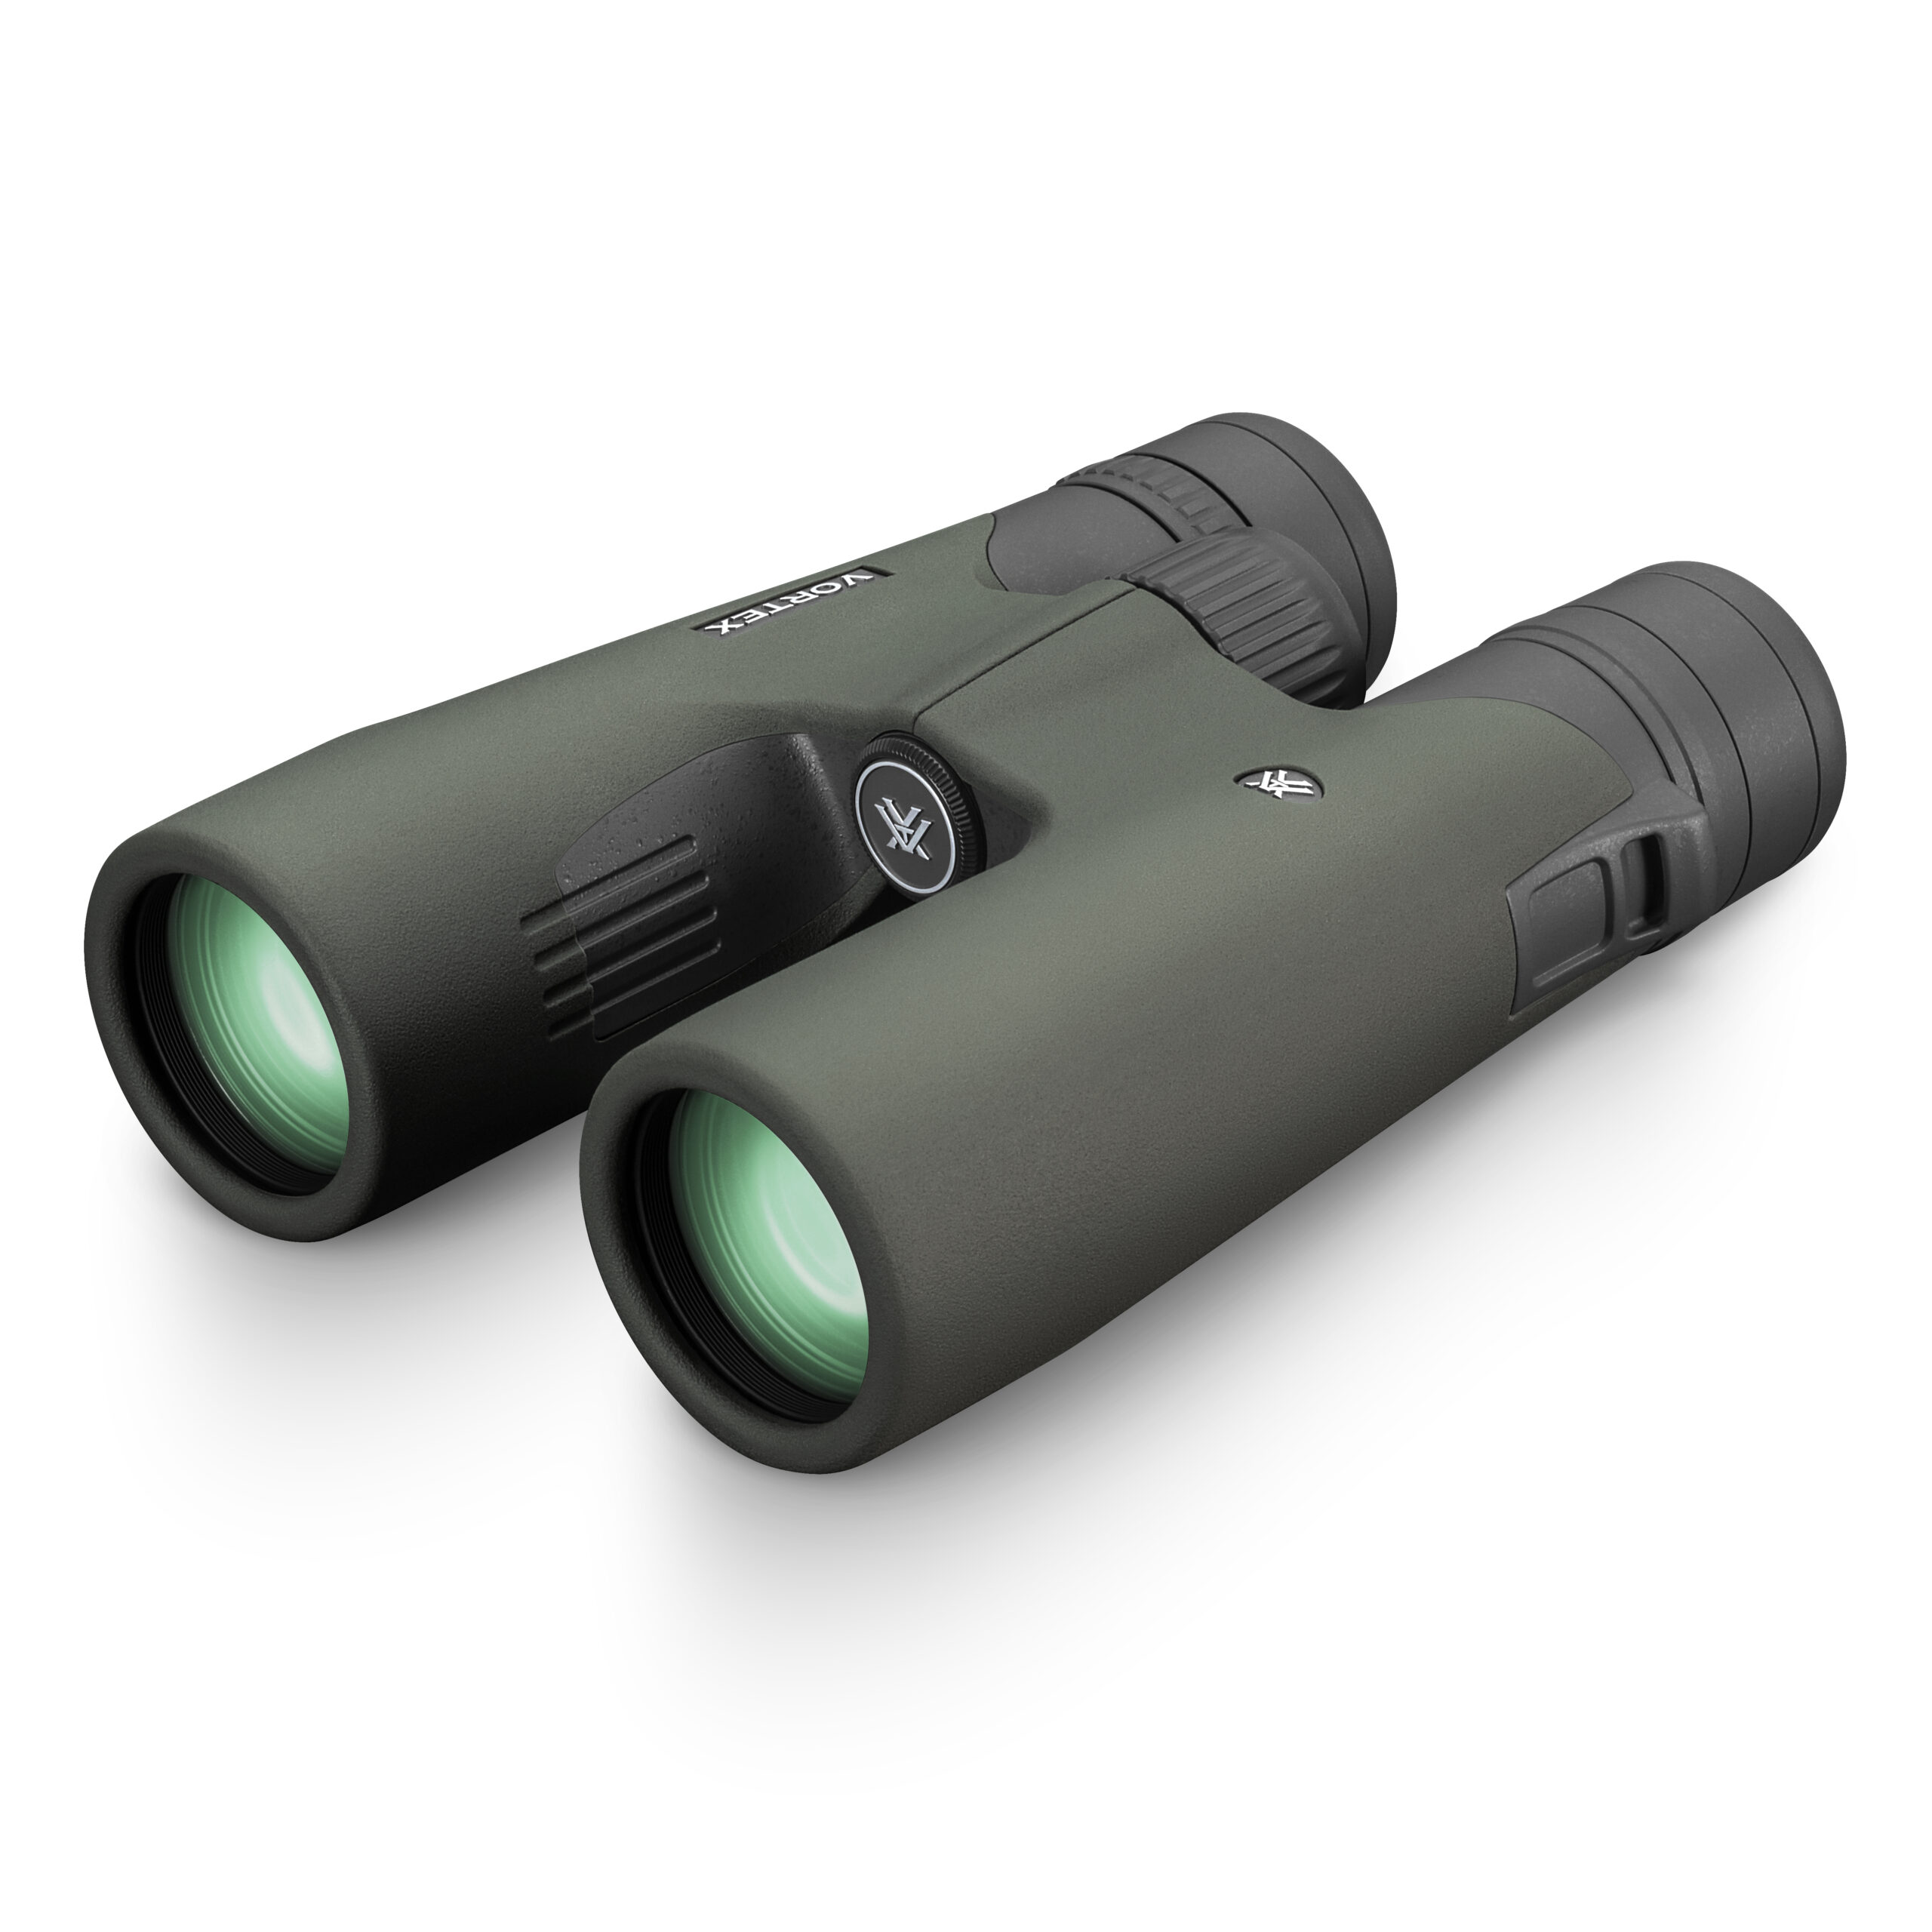 Green binoculars with blue lenses on a white background.